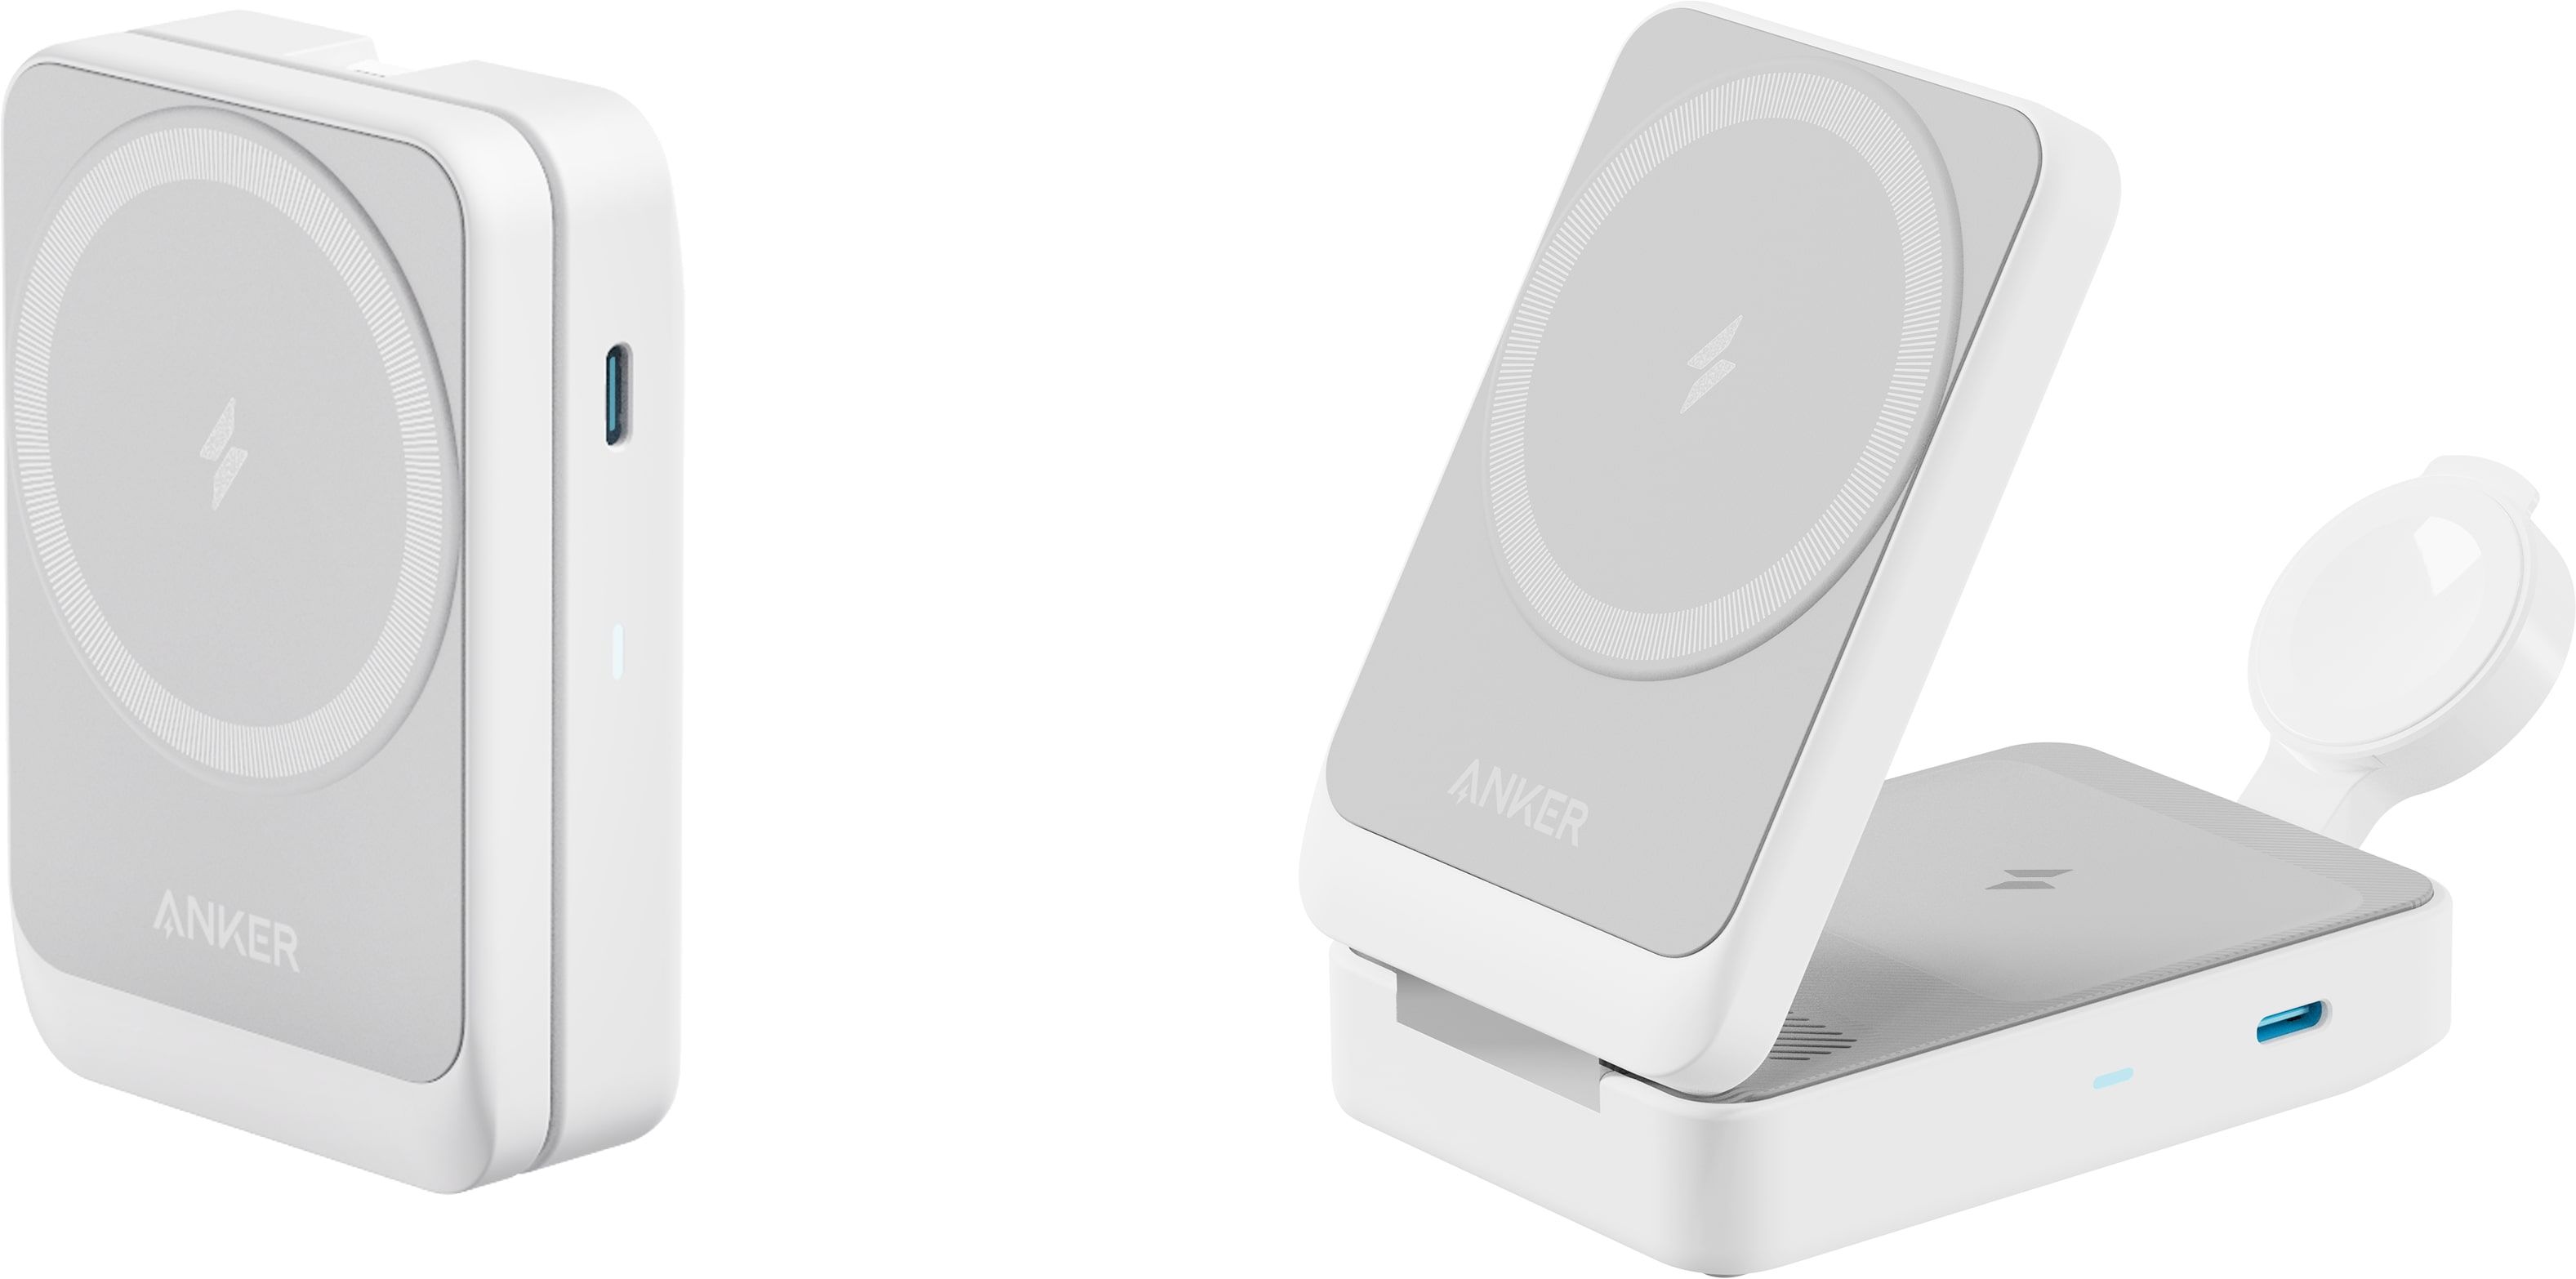 Anker's new chargers bring Qi2 MagSafe-style charging to the masses